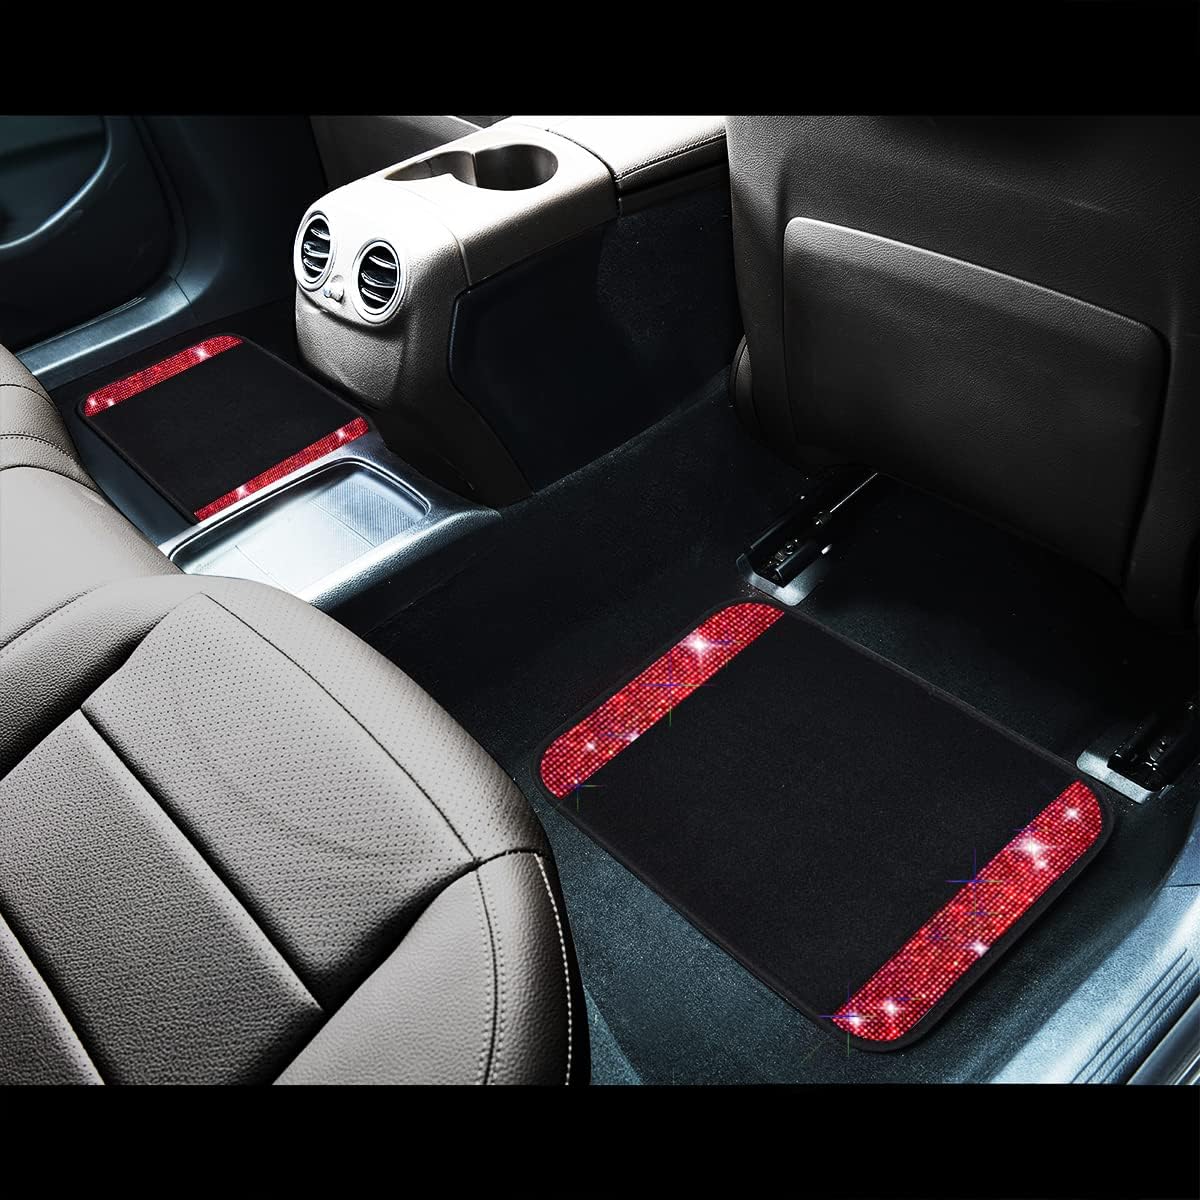 CAR PASS Universal Fit Pretty Shining Rhinestones Carpet Full Set 4PCS Car Floor Mats with Car Seat Covers,Fit for Women Girls Suvs,Sedans,Cars,Vans(Black and Red)